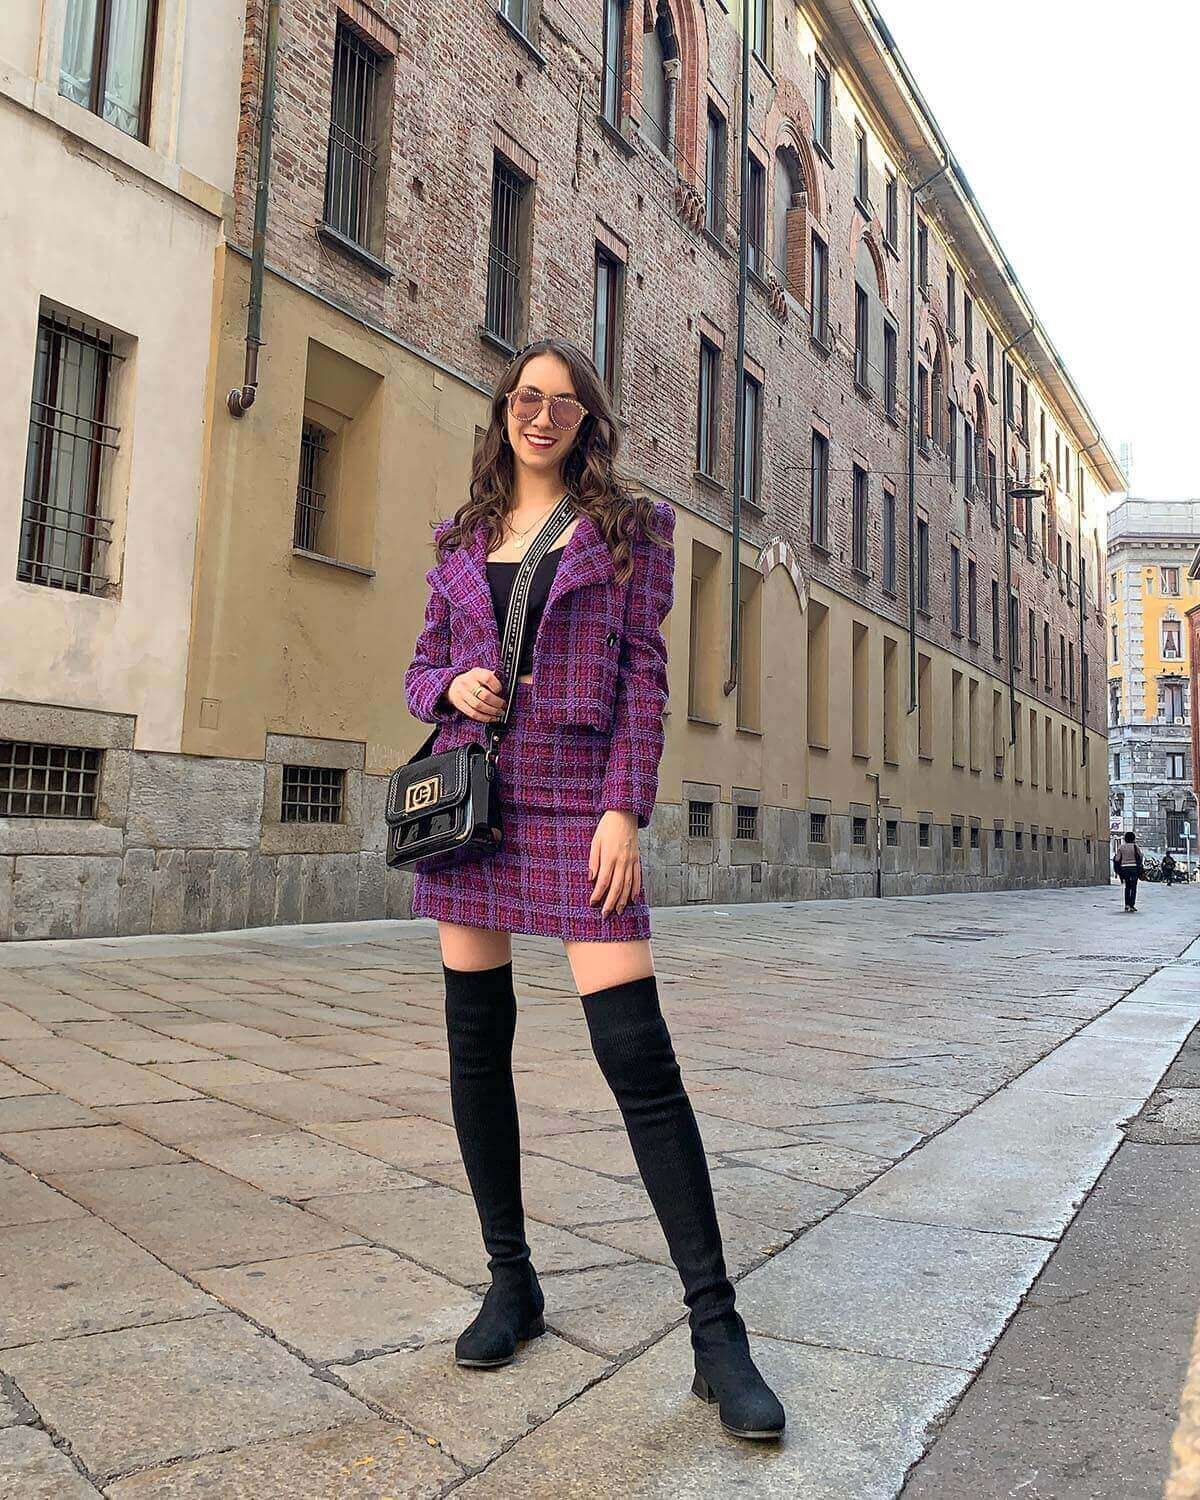 3 French outfits: purple tweed skirt and jacket